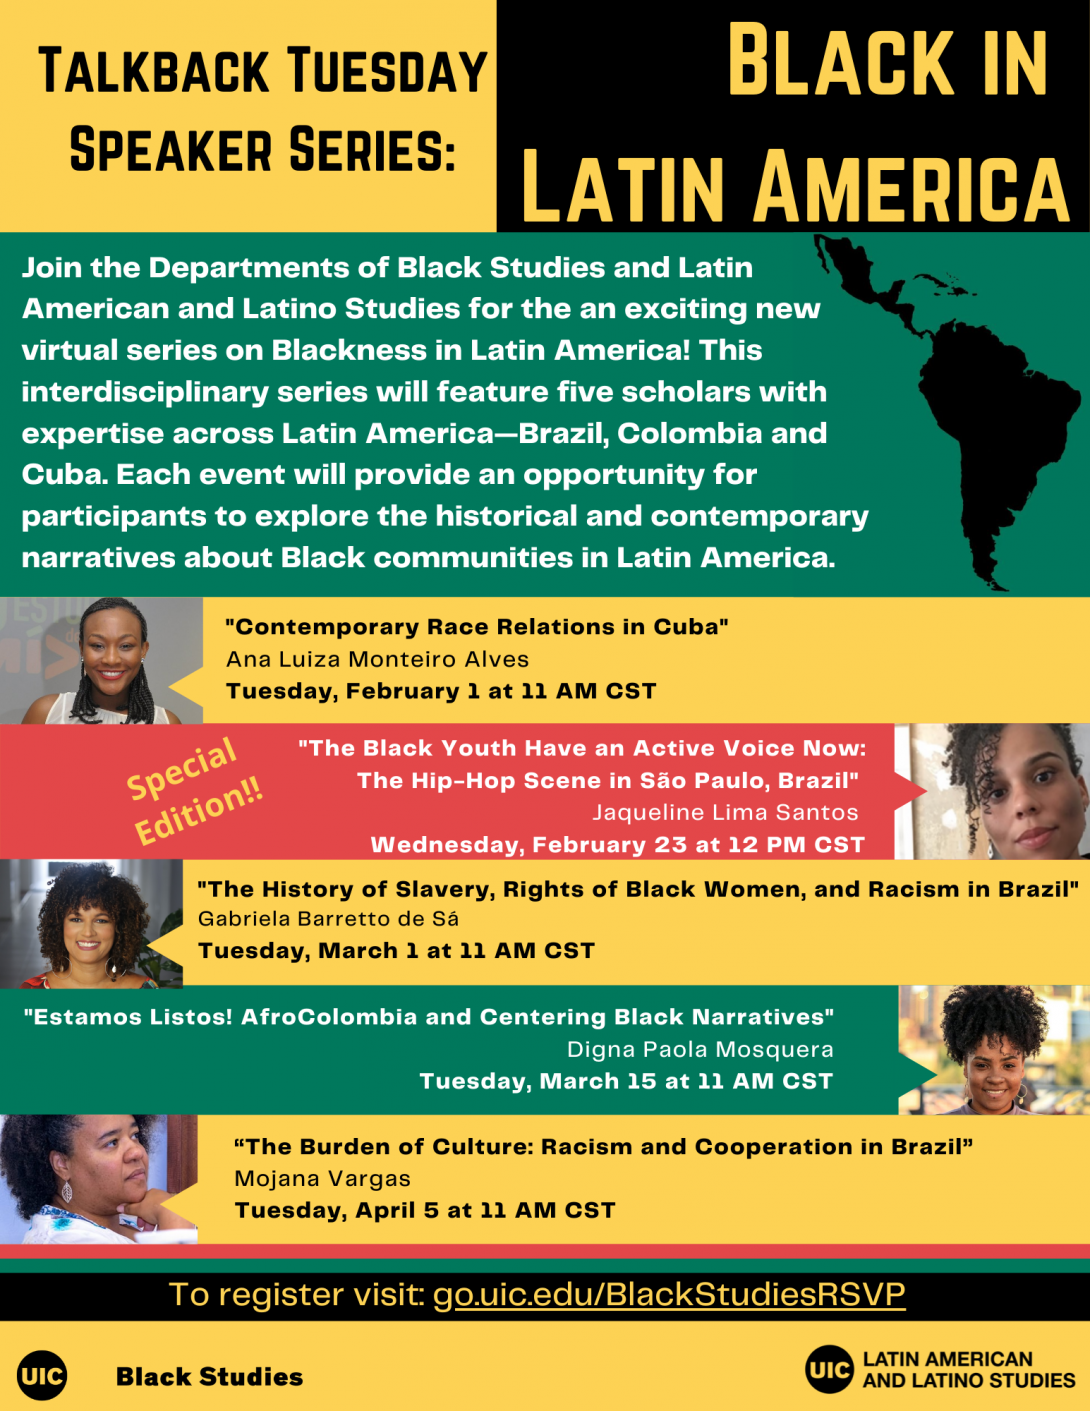 flyer for Black in Latin American series with yellow background with black, red, green, and white details and images of speakers.